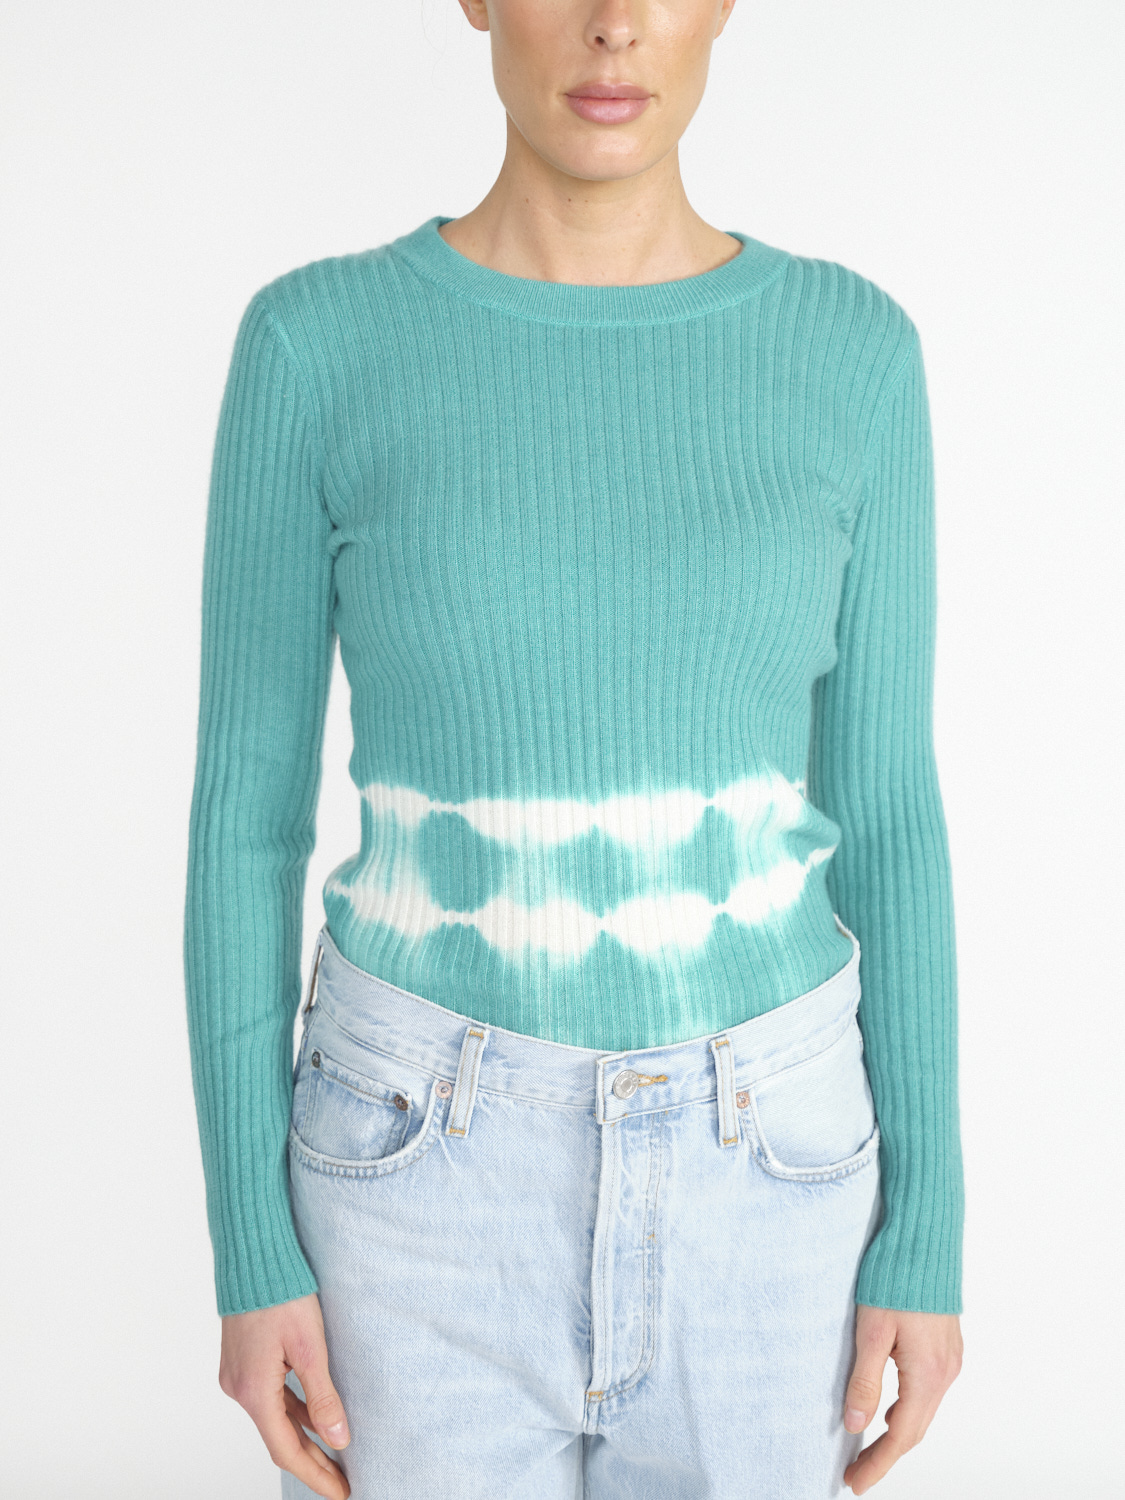 Kujten Bibi ribbed cashmere sweater with tie-dye details  mint XS/S